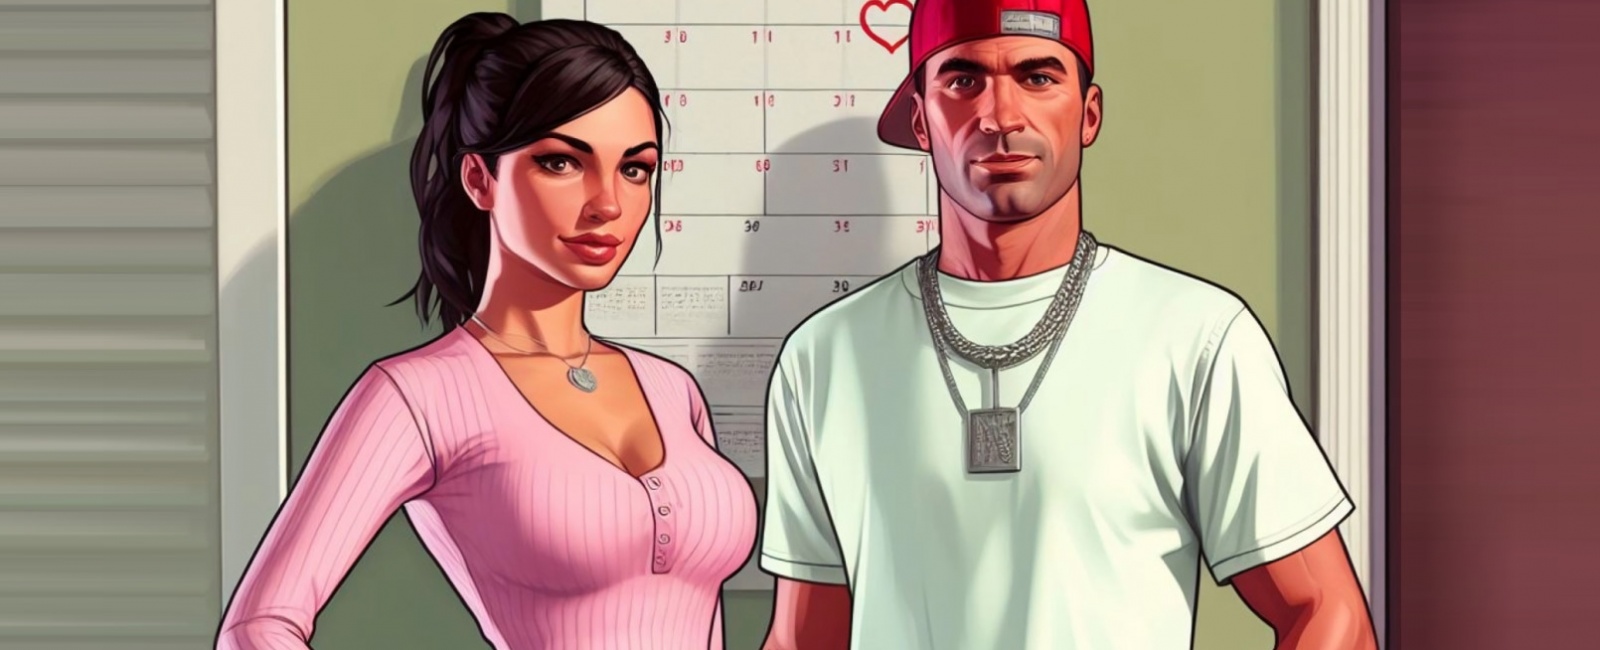 GTA 6 Metacritic page appears, sending fans into frenzy